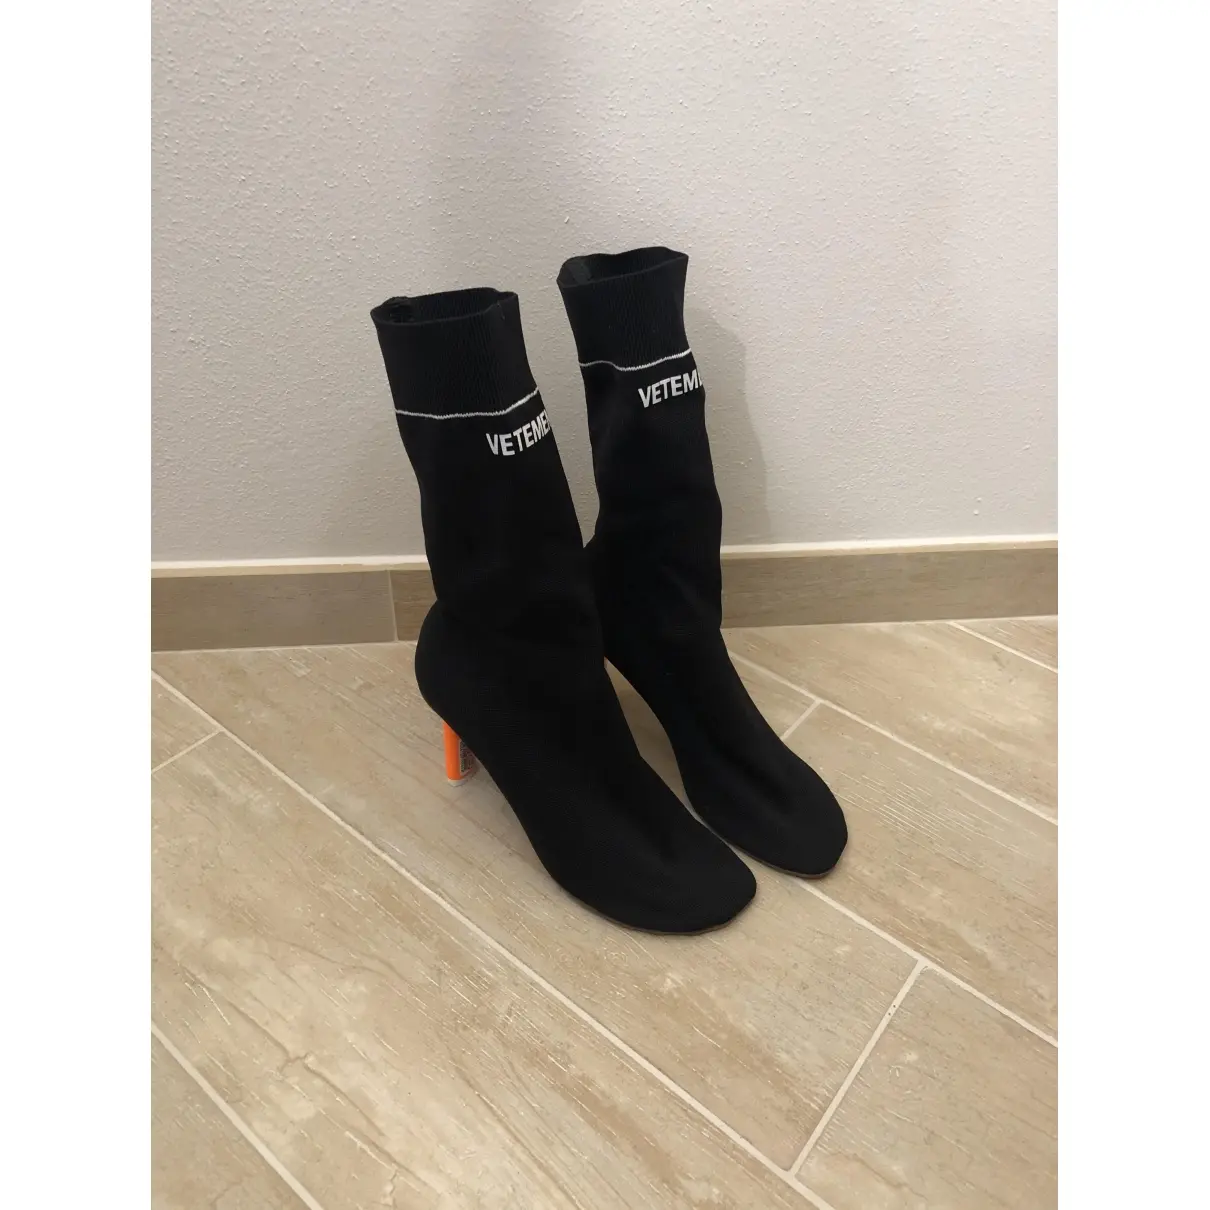 Vetements Cloth boots for sale